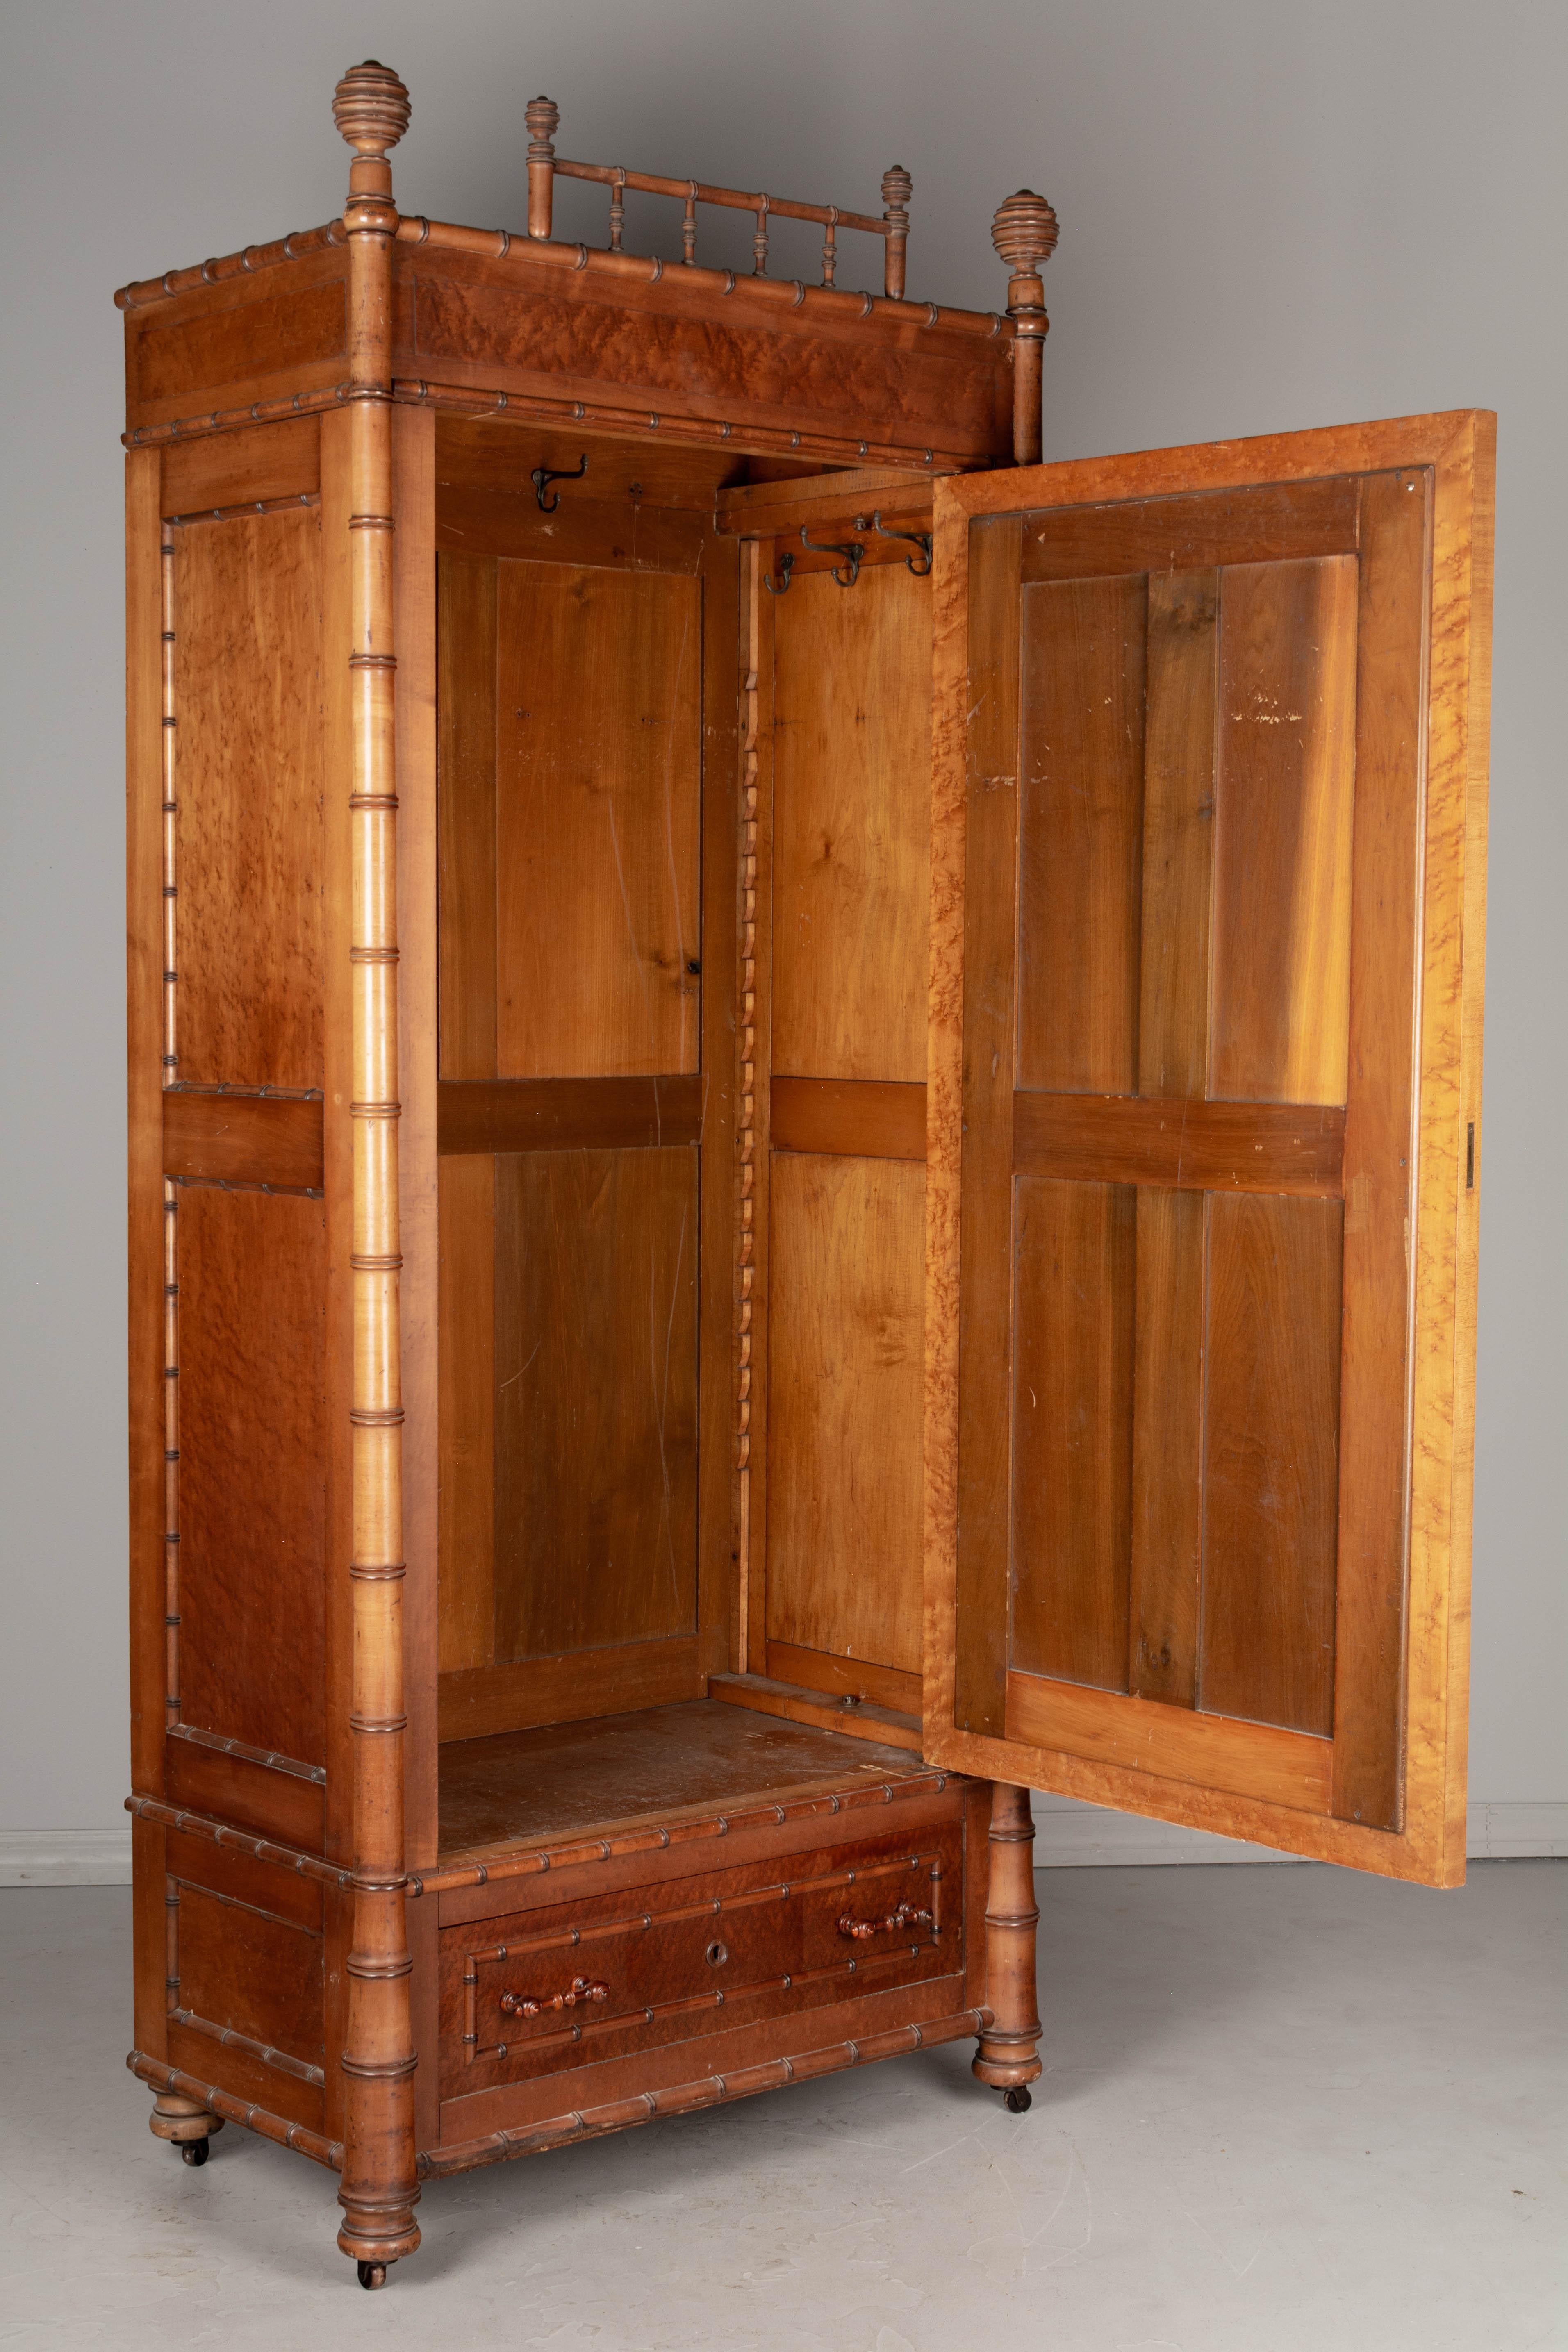 A 19th century American Victorian Aesthetic Movement faux bamboo armoire and bedside table by R.J. Horner made of solid cherry and amber stained birds eye maple. The armoire, or wardrobe, has a beveled mirror door with working lock and key (new